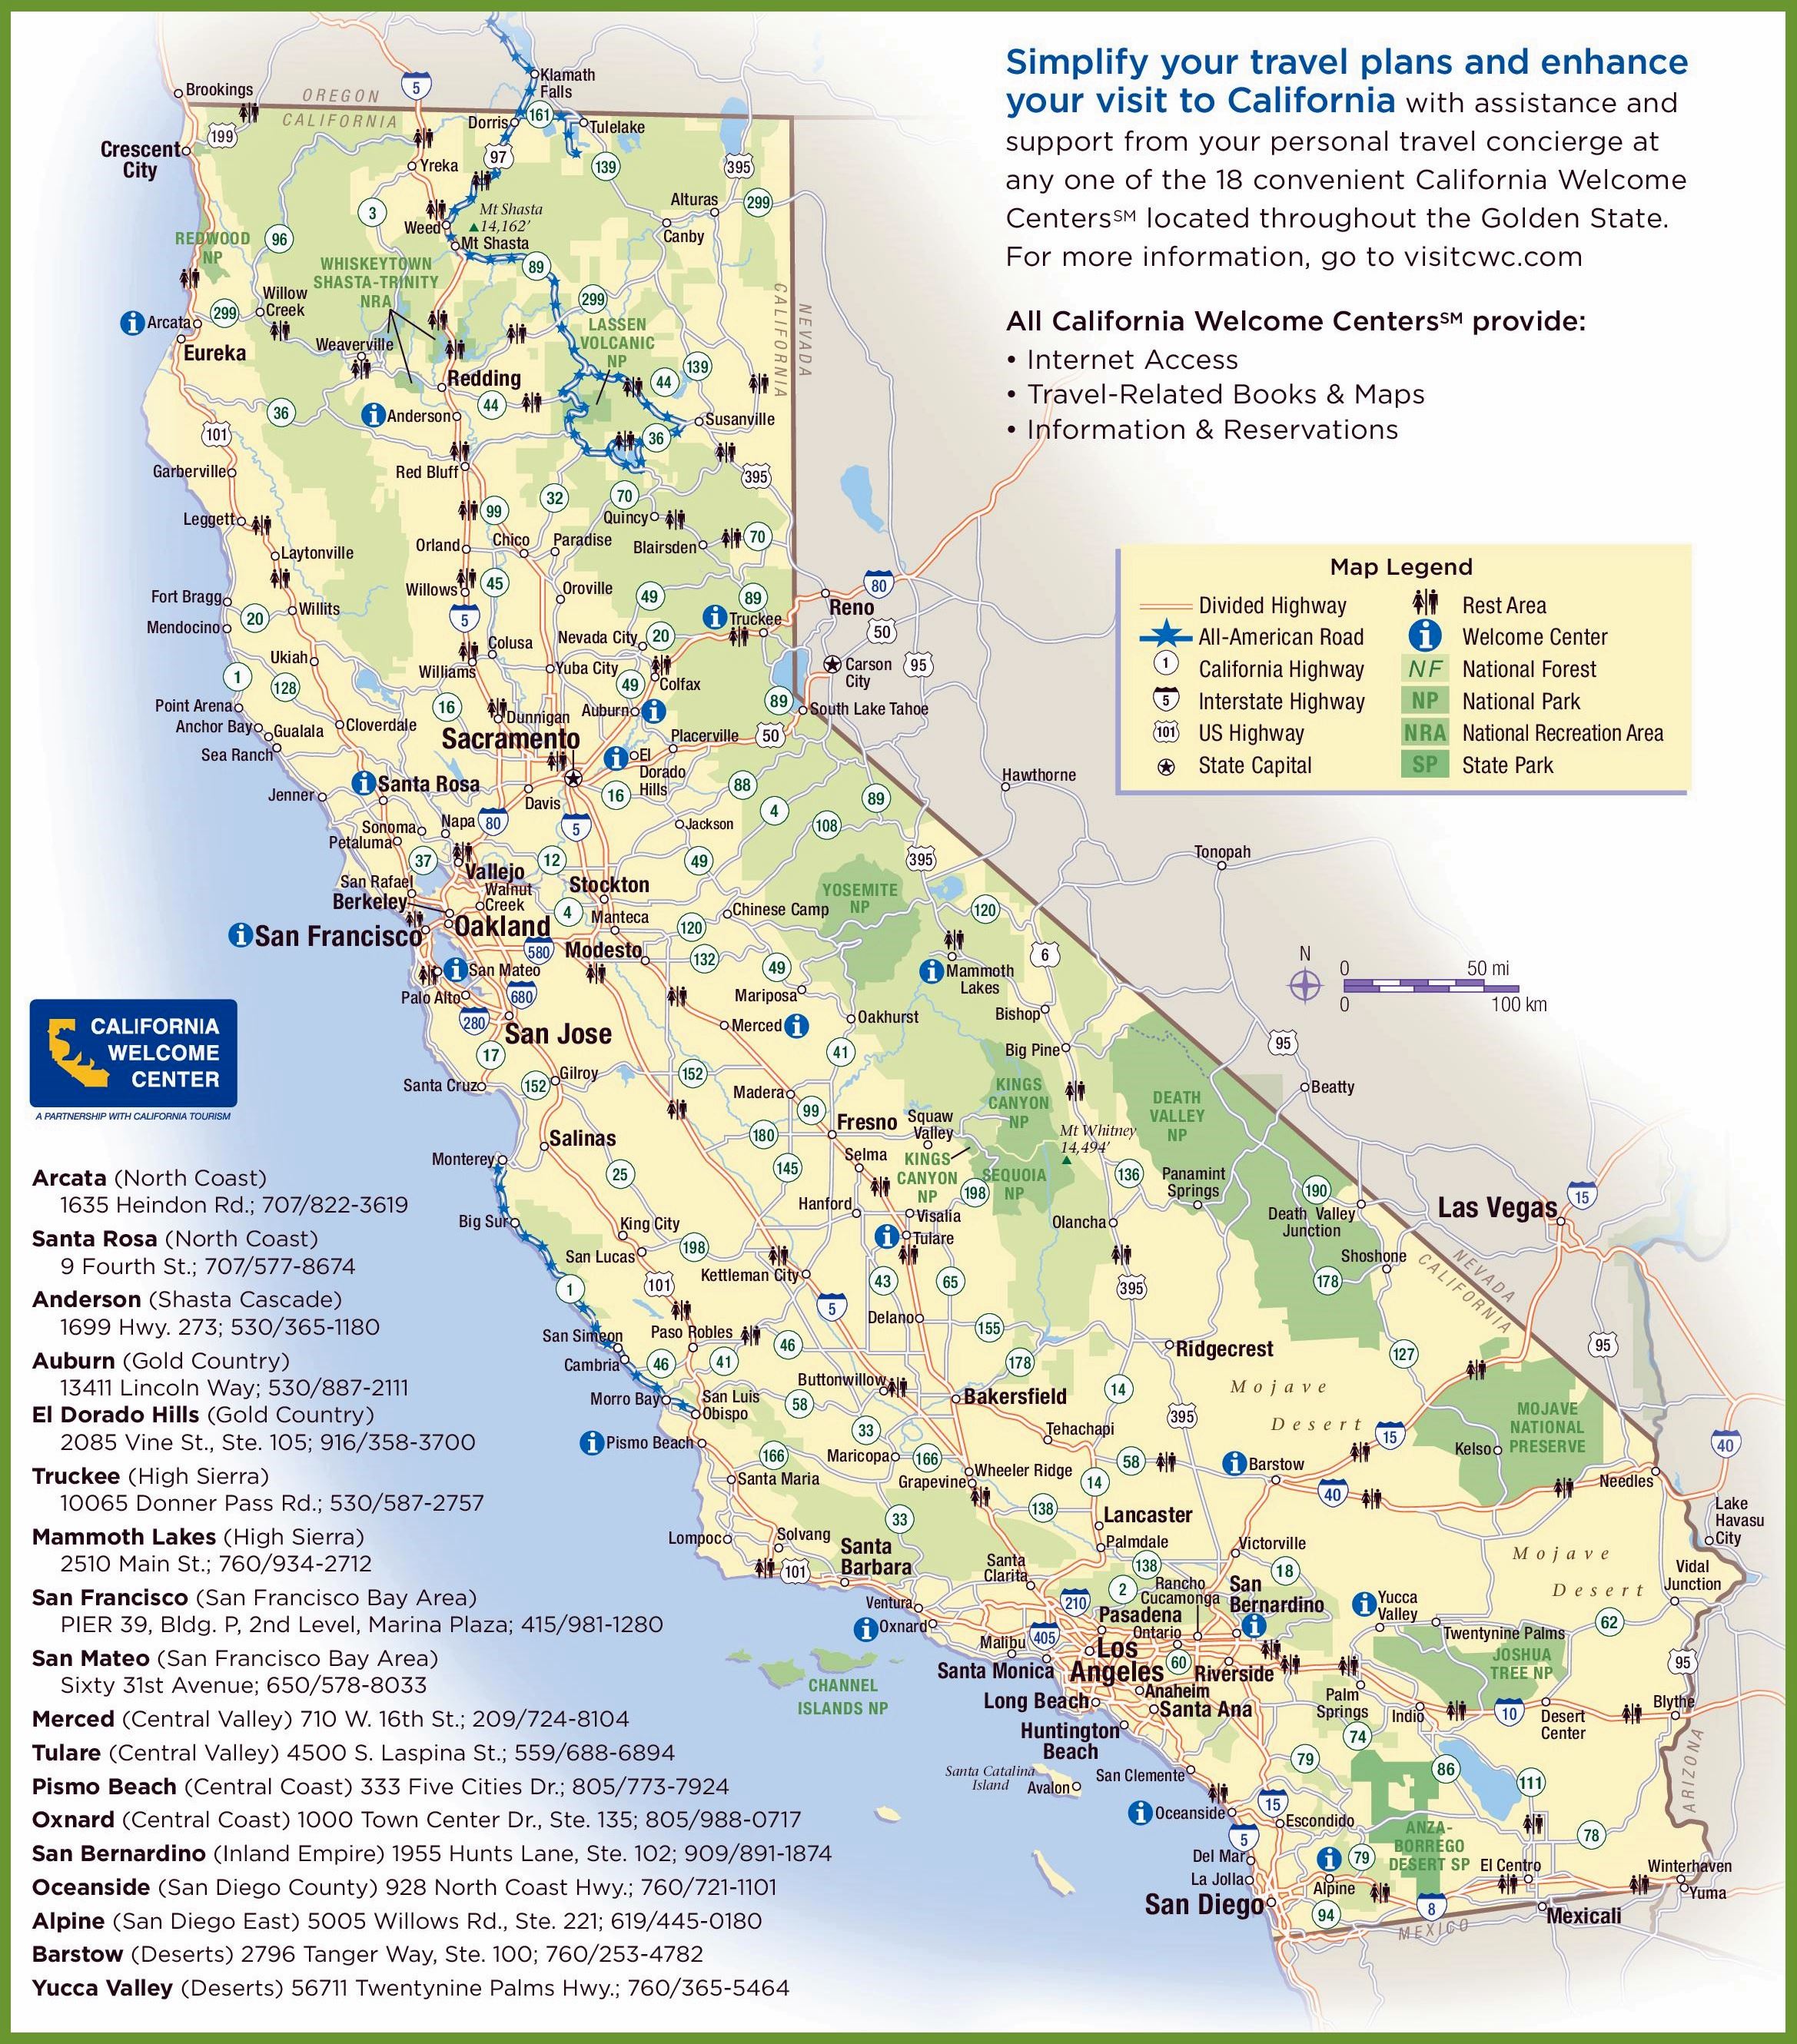 Large California Maps for Free Download and Print | High-Resolution and